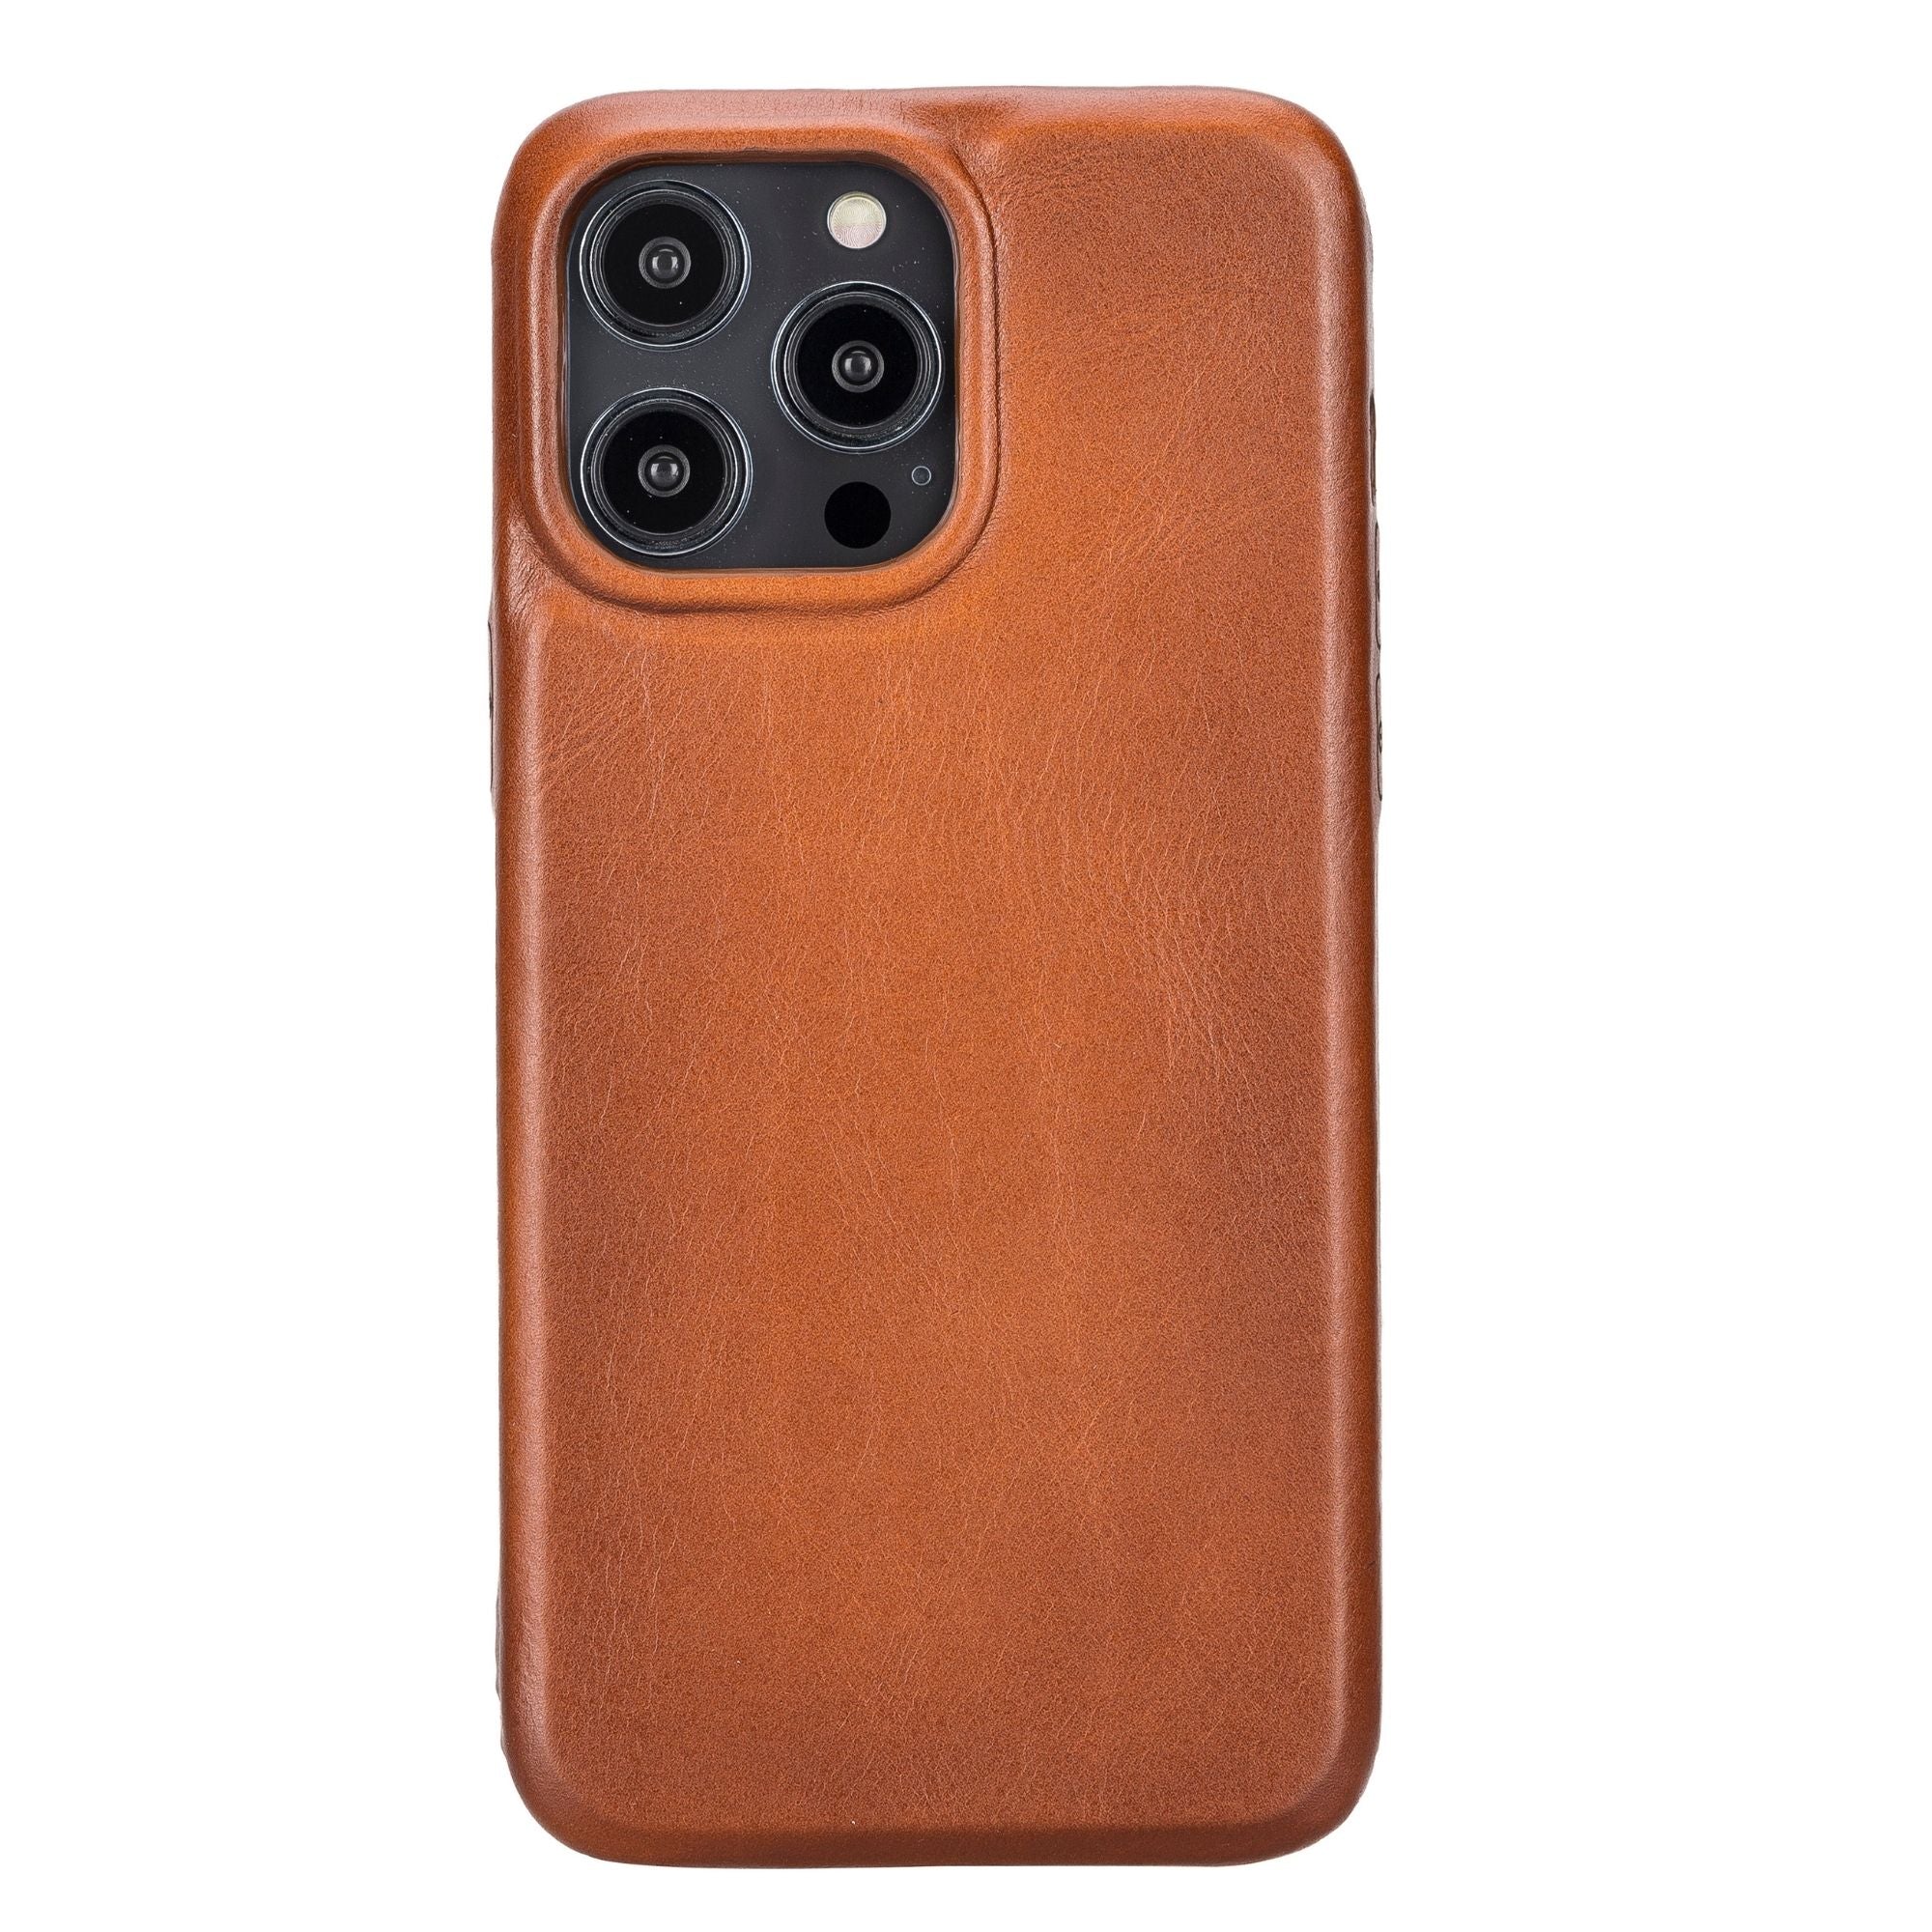 Pinedale Leather Snap-on Case for iPhone 12 Series - iPhone 12 Pro Max - Tan - TORONATA